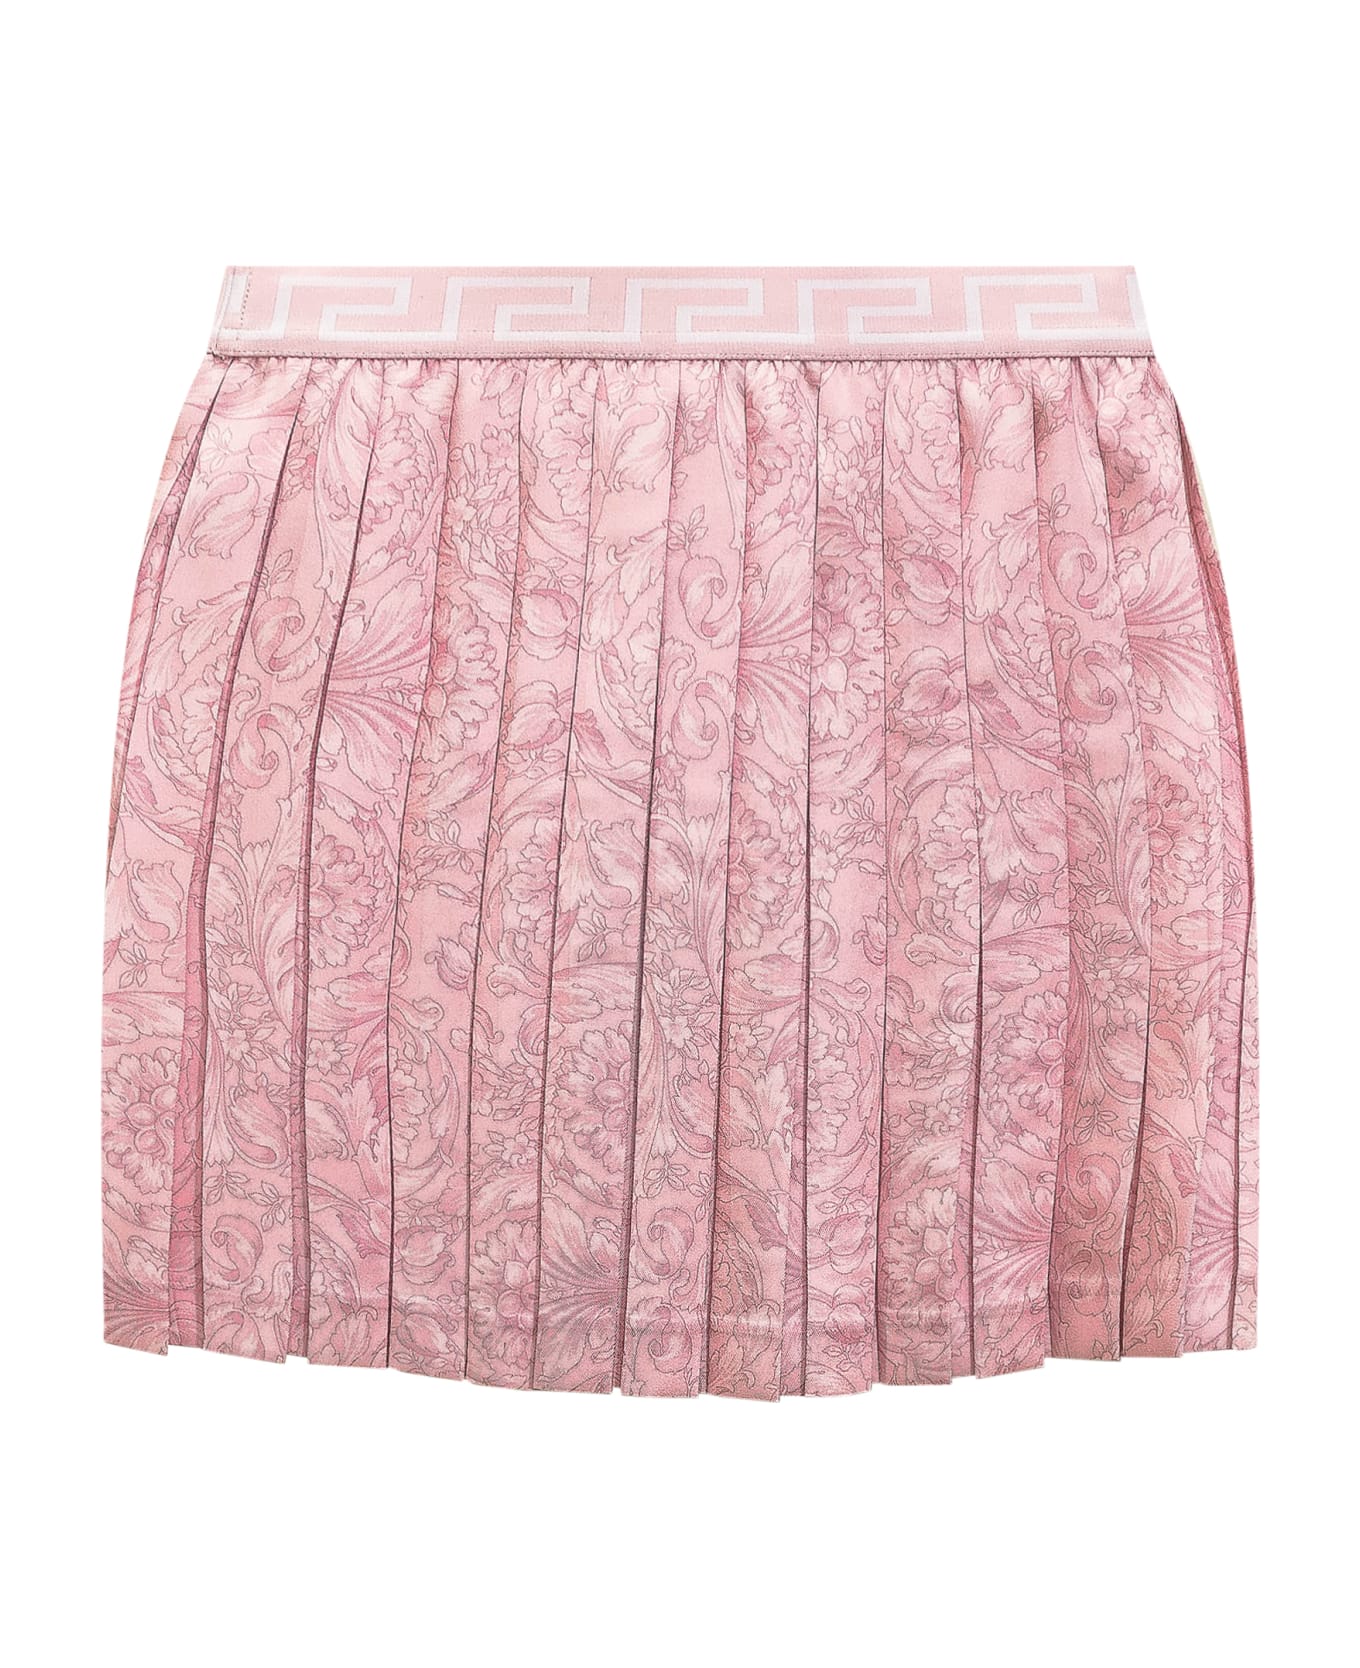 Young Versace Barocco Skirt - PALE PINK